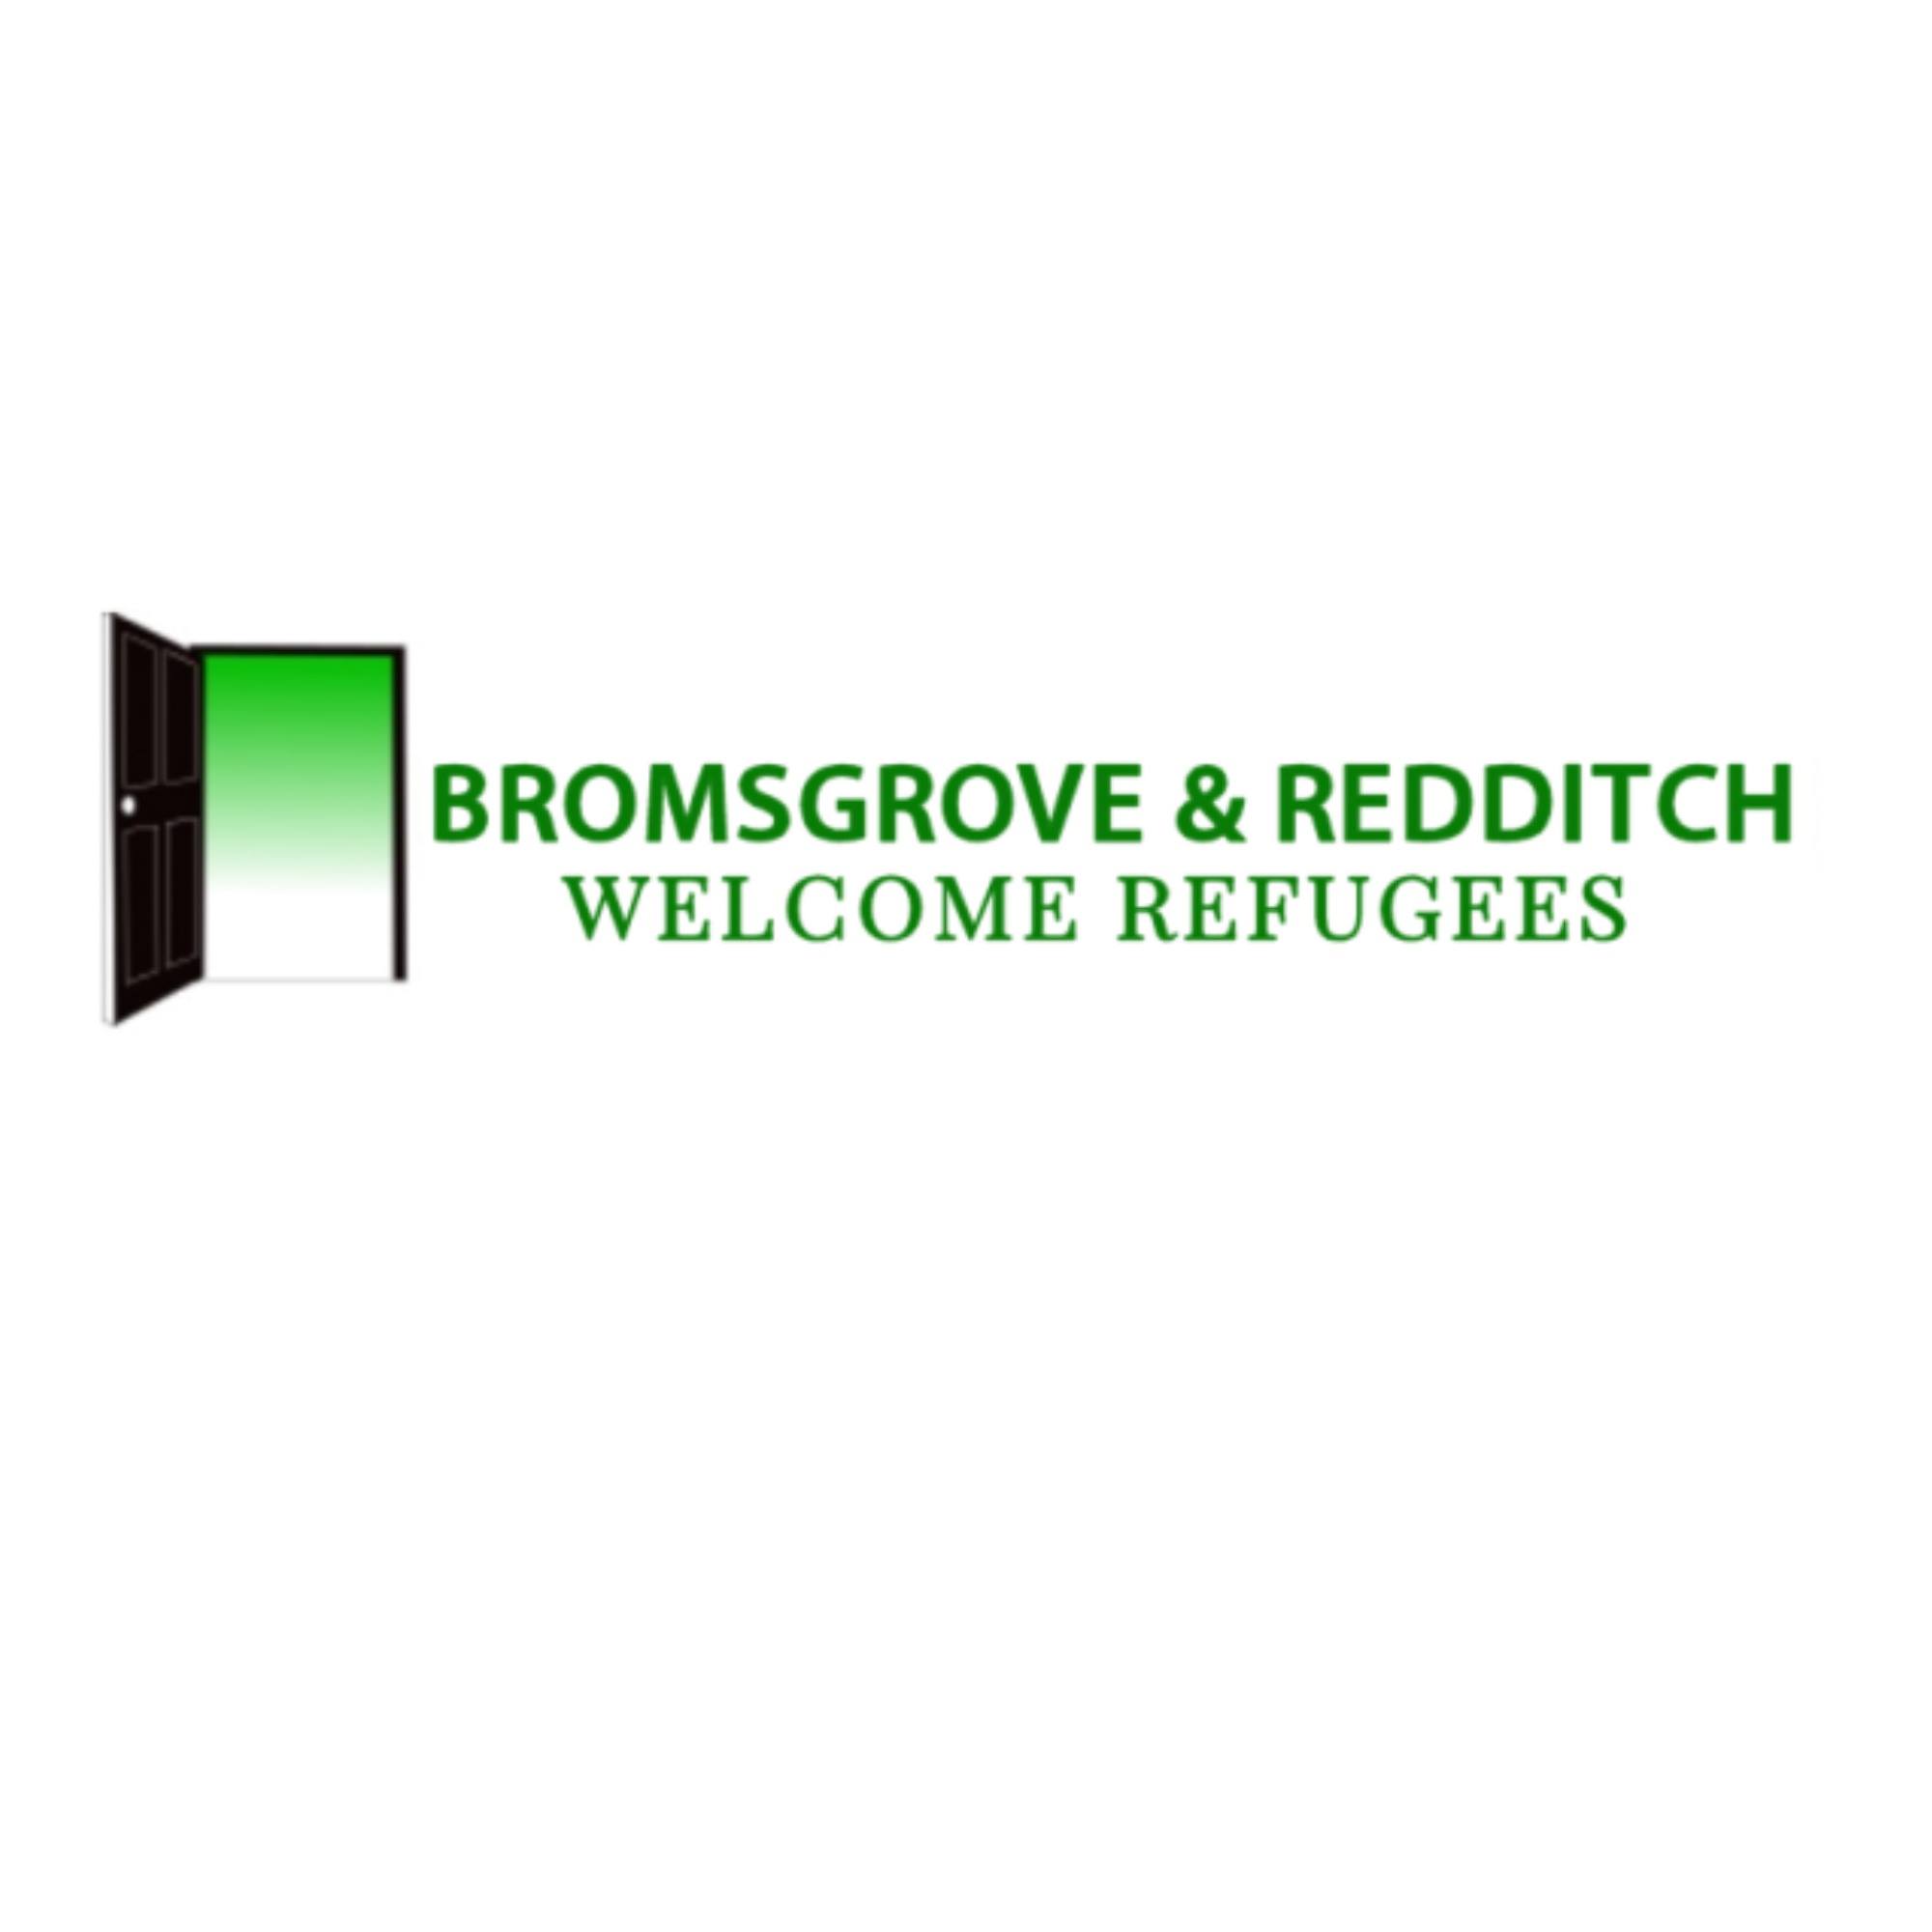 Bromsgrove & Redditch Welcomes Refugees Image